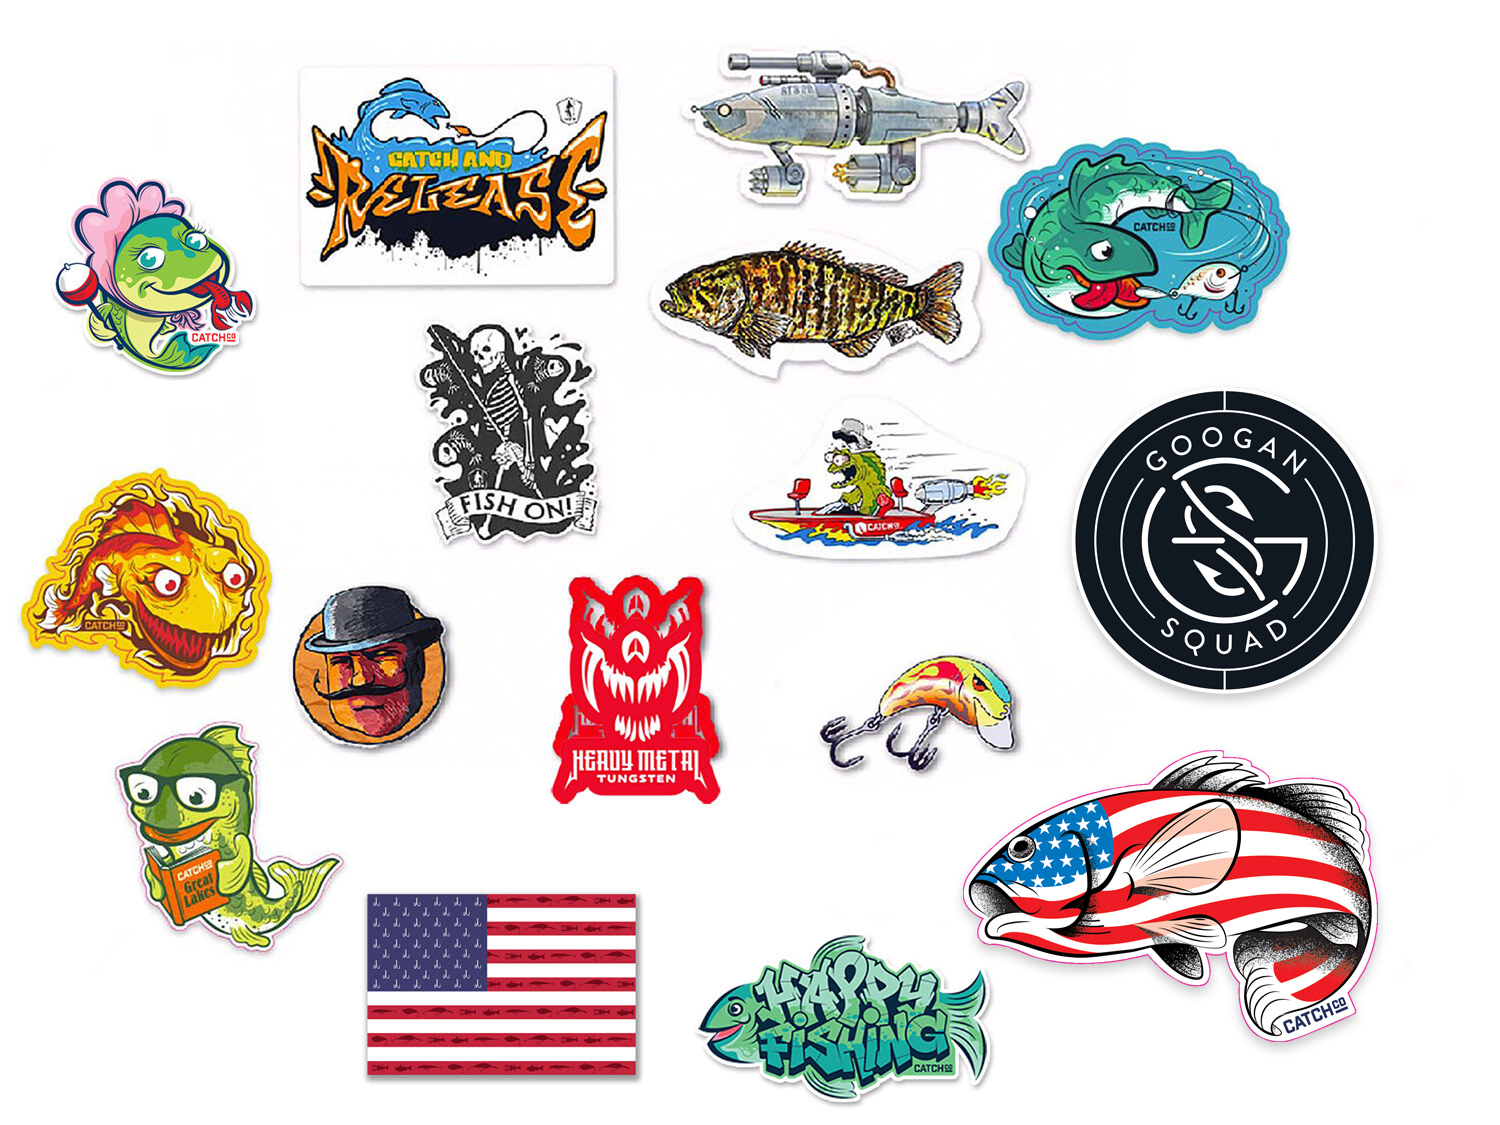 Bait And Tackle Stickers for Sale